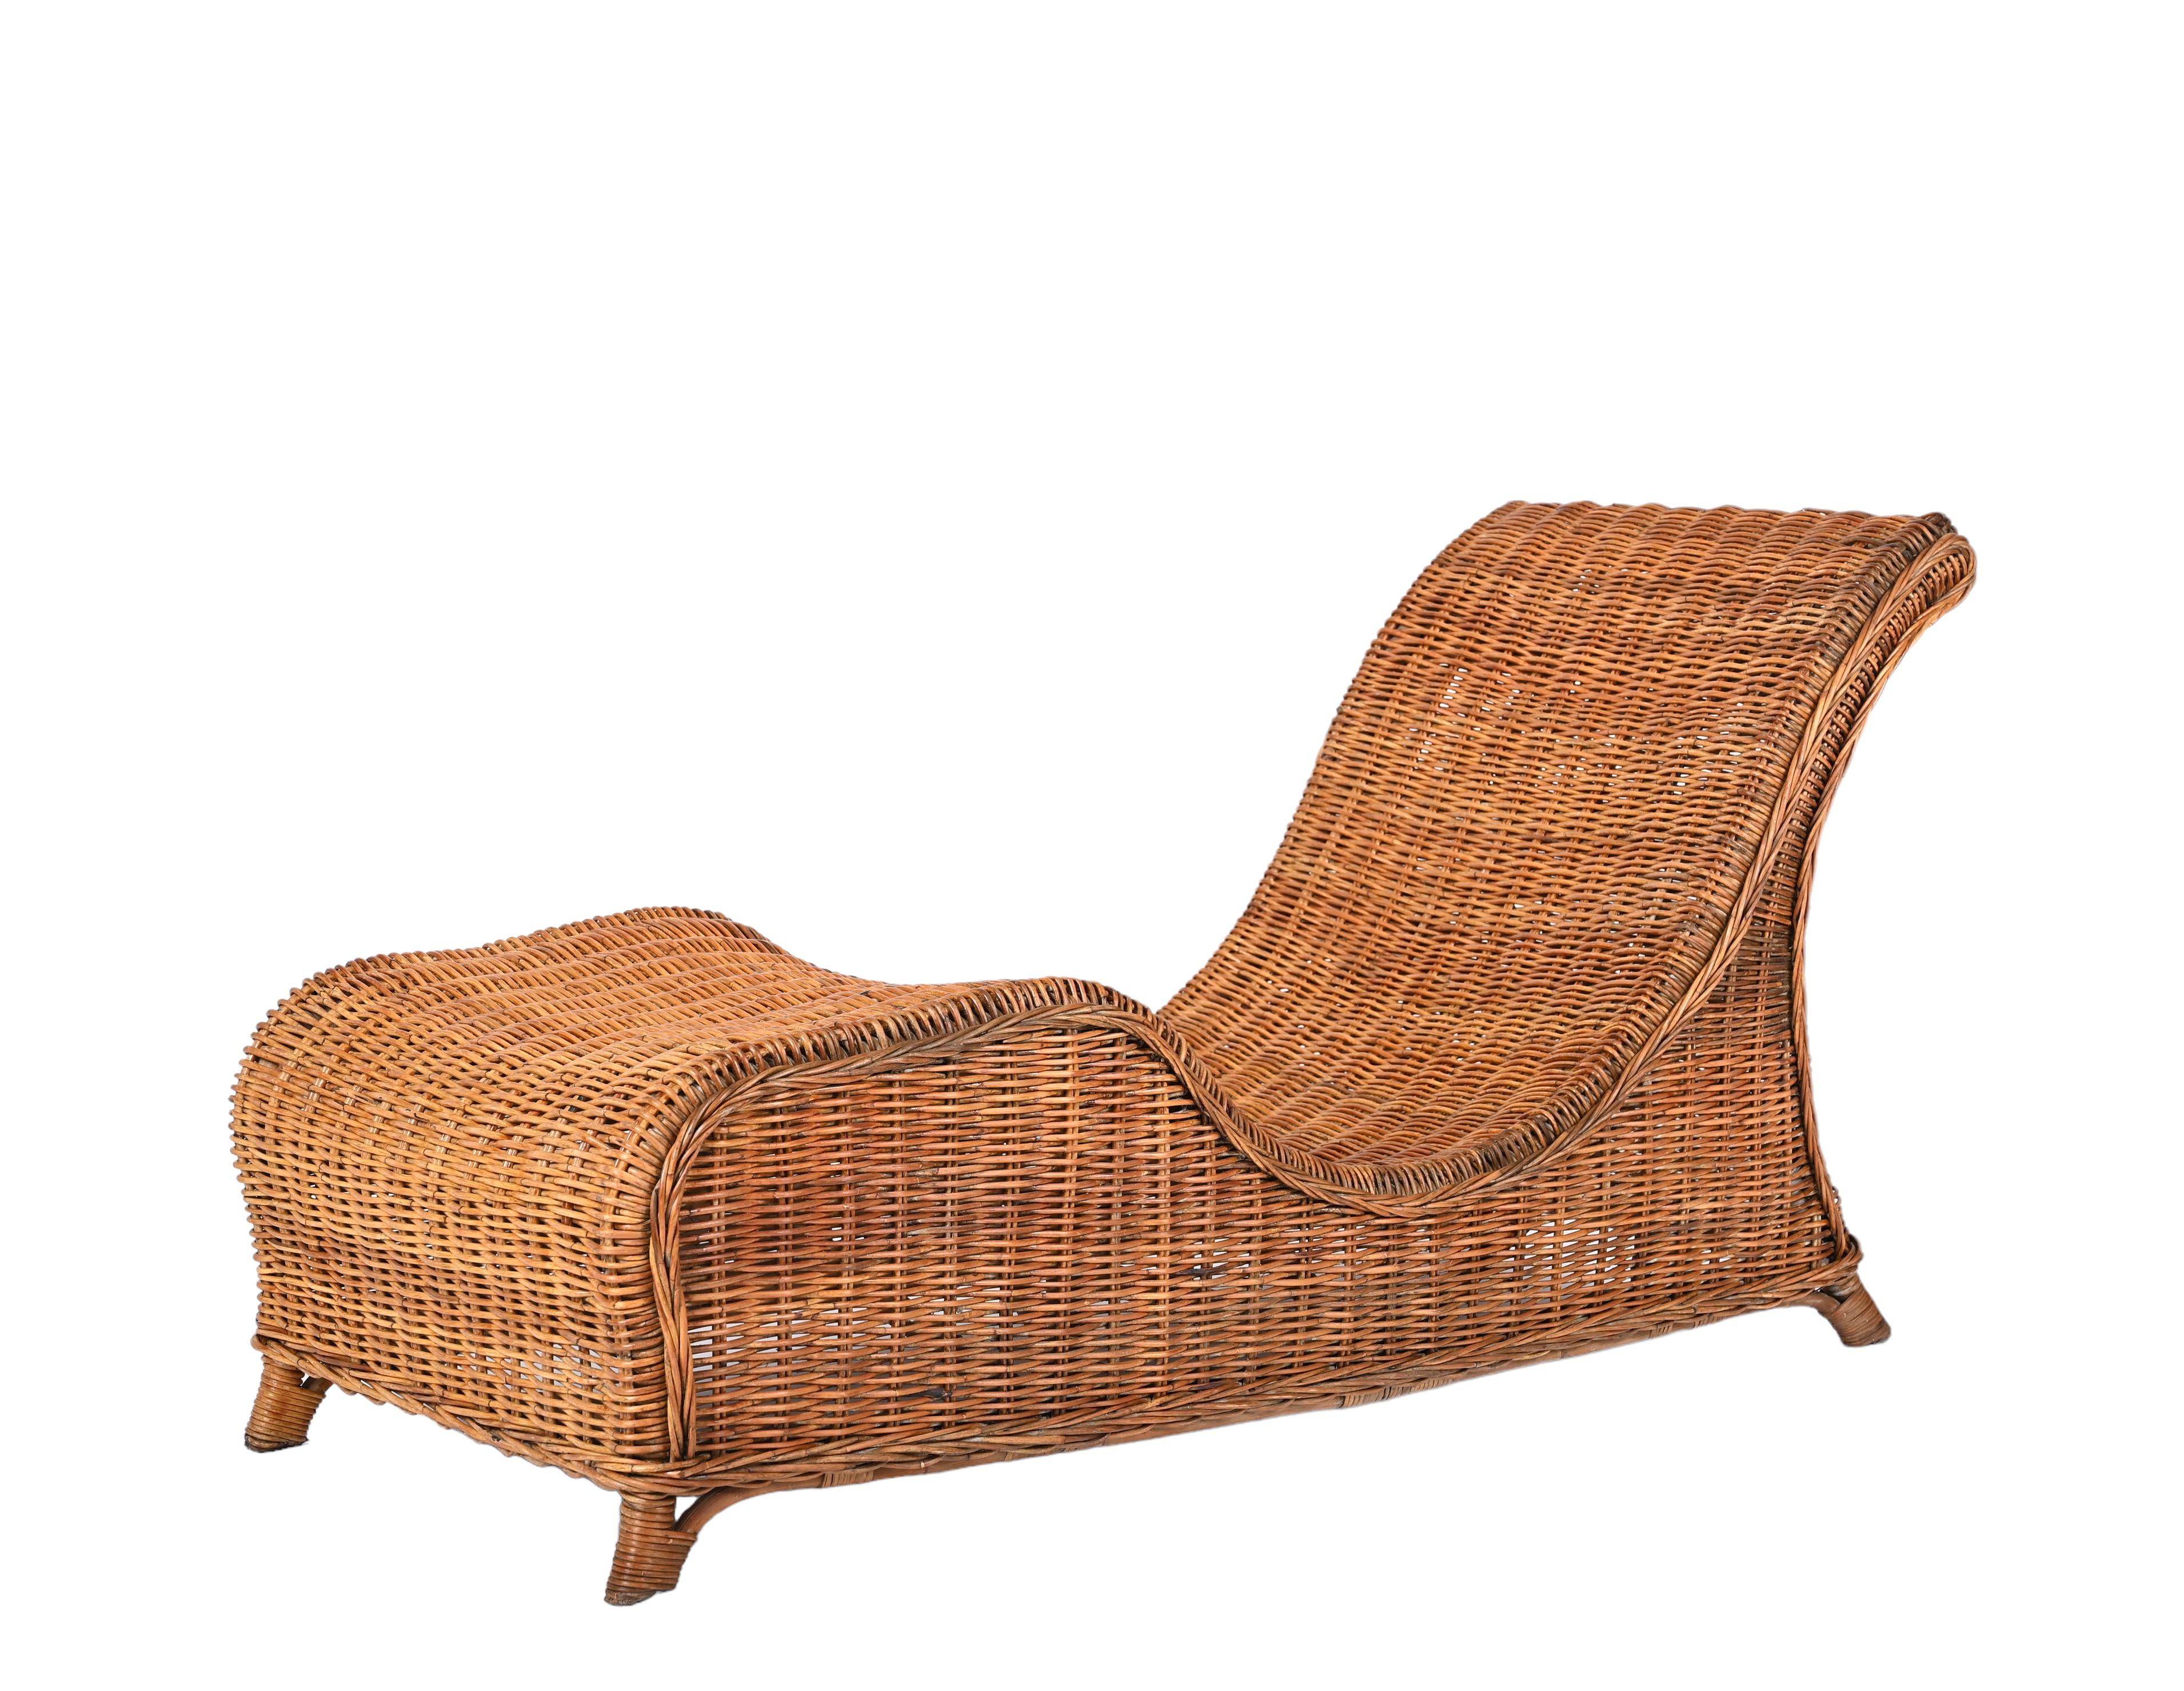 Midcentury Modern Bamboo and Wicker Italian Chaise Longue, 1960s For Sale 5